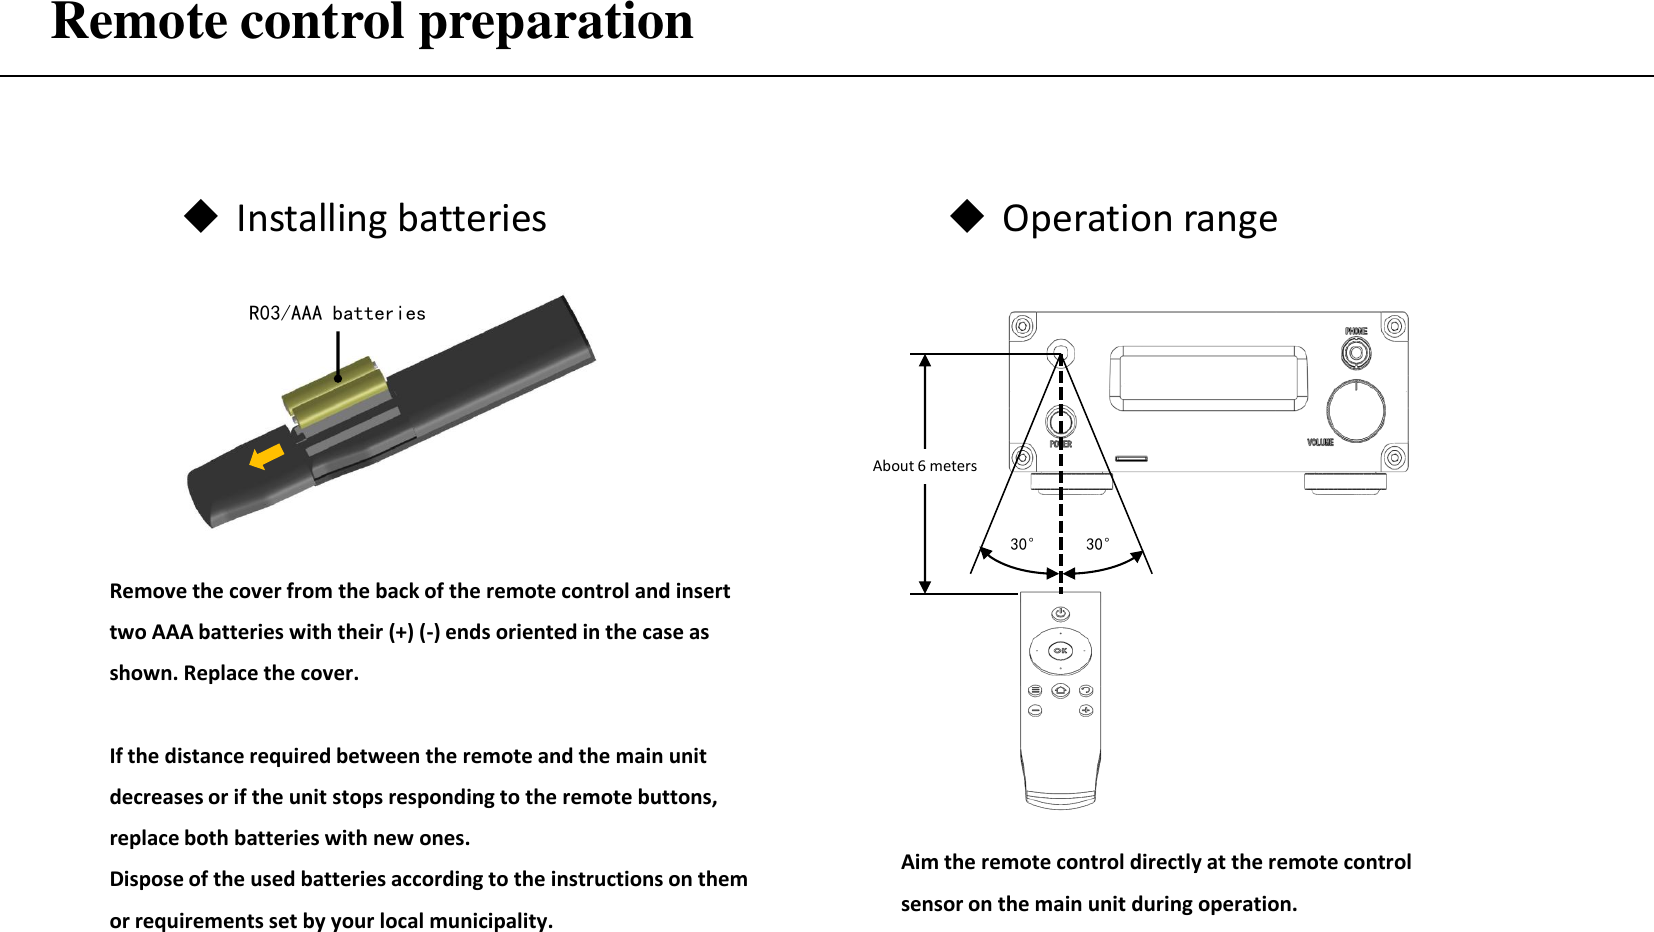 Remote control preparation Installing batteries R03/AAA batteries Remove the cover from the back of the remote control and insert two AAA batteries with their (+) (-) ends oriented in the case as shown. Replace the cover.   If the distance required between the remote and the main unit decreases or if the unit stops responding to the remote buttons, replace both batteries with new ones. Dispose of the used batteries according to the instructions on them or requirements set by your local municipality. 30° 30° About 6 meters Operation range Aim the remote control directly at the remote control sensor on the main unit during operation. 